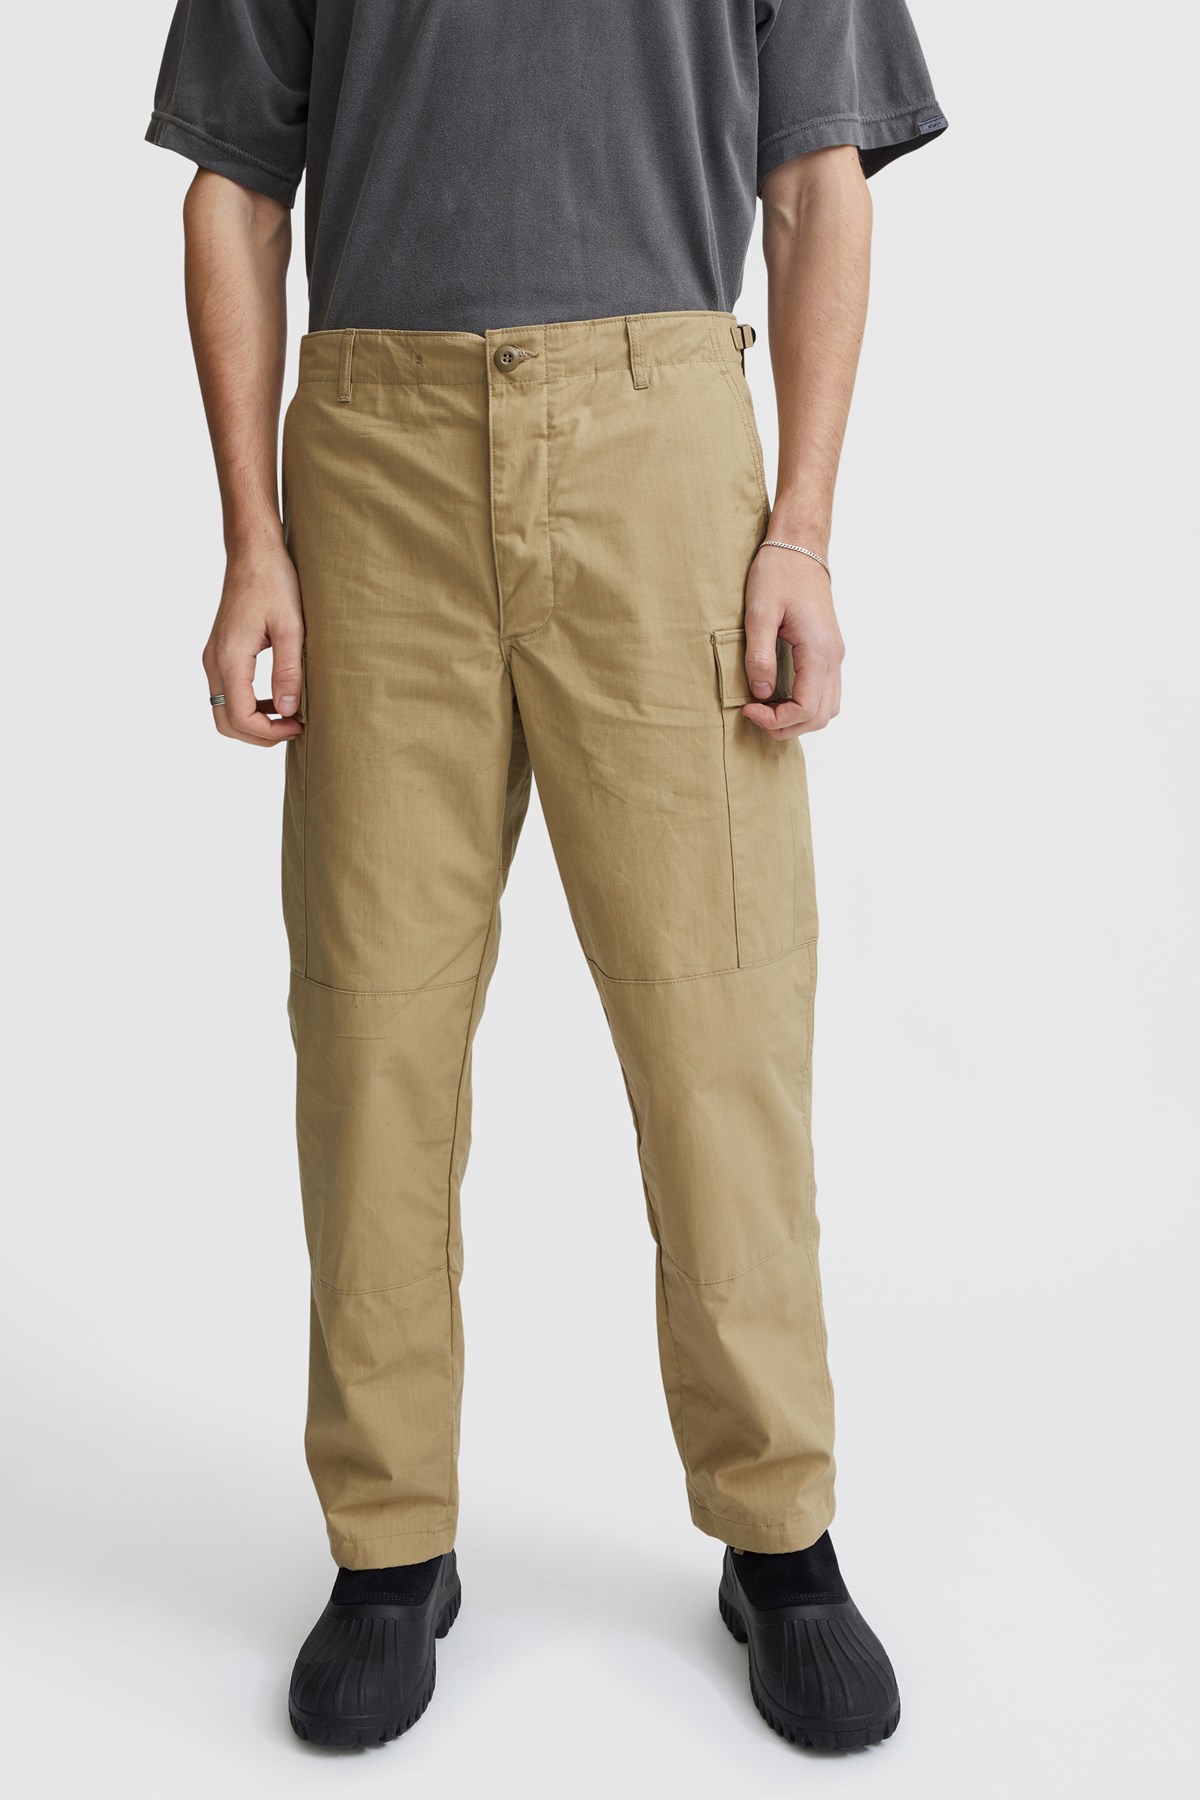 WTAPS WMILL-Trouser 01/Nyco. Ripstop Beige | WoodWood.com